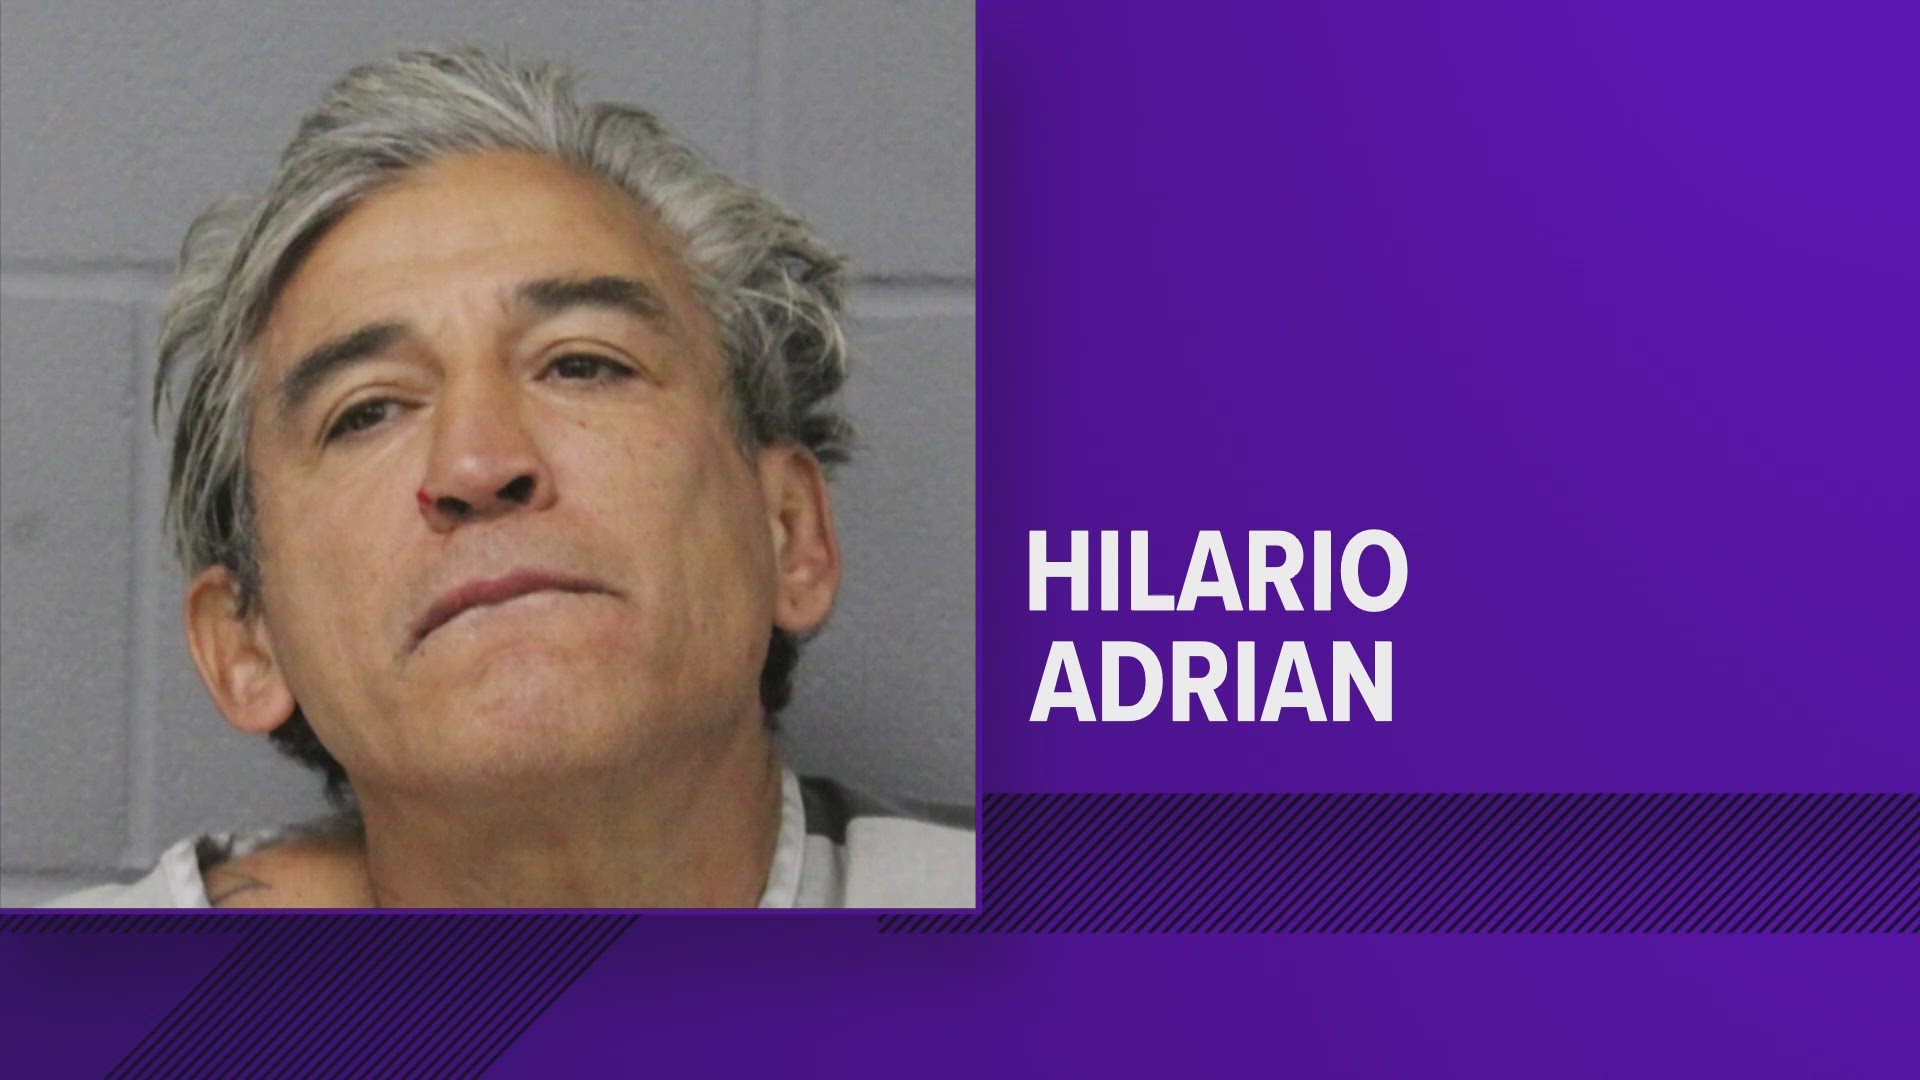 Police say 56-year-old Hilario Adrian was arrested and charged with murder after allegedly stabbing a man to death on Dec. 10.